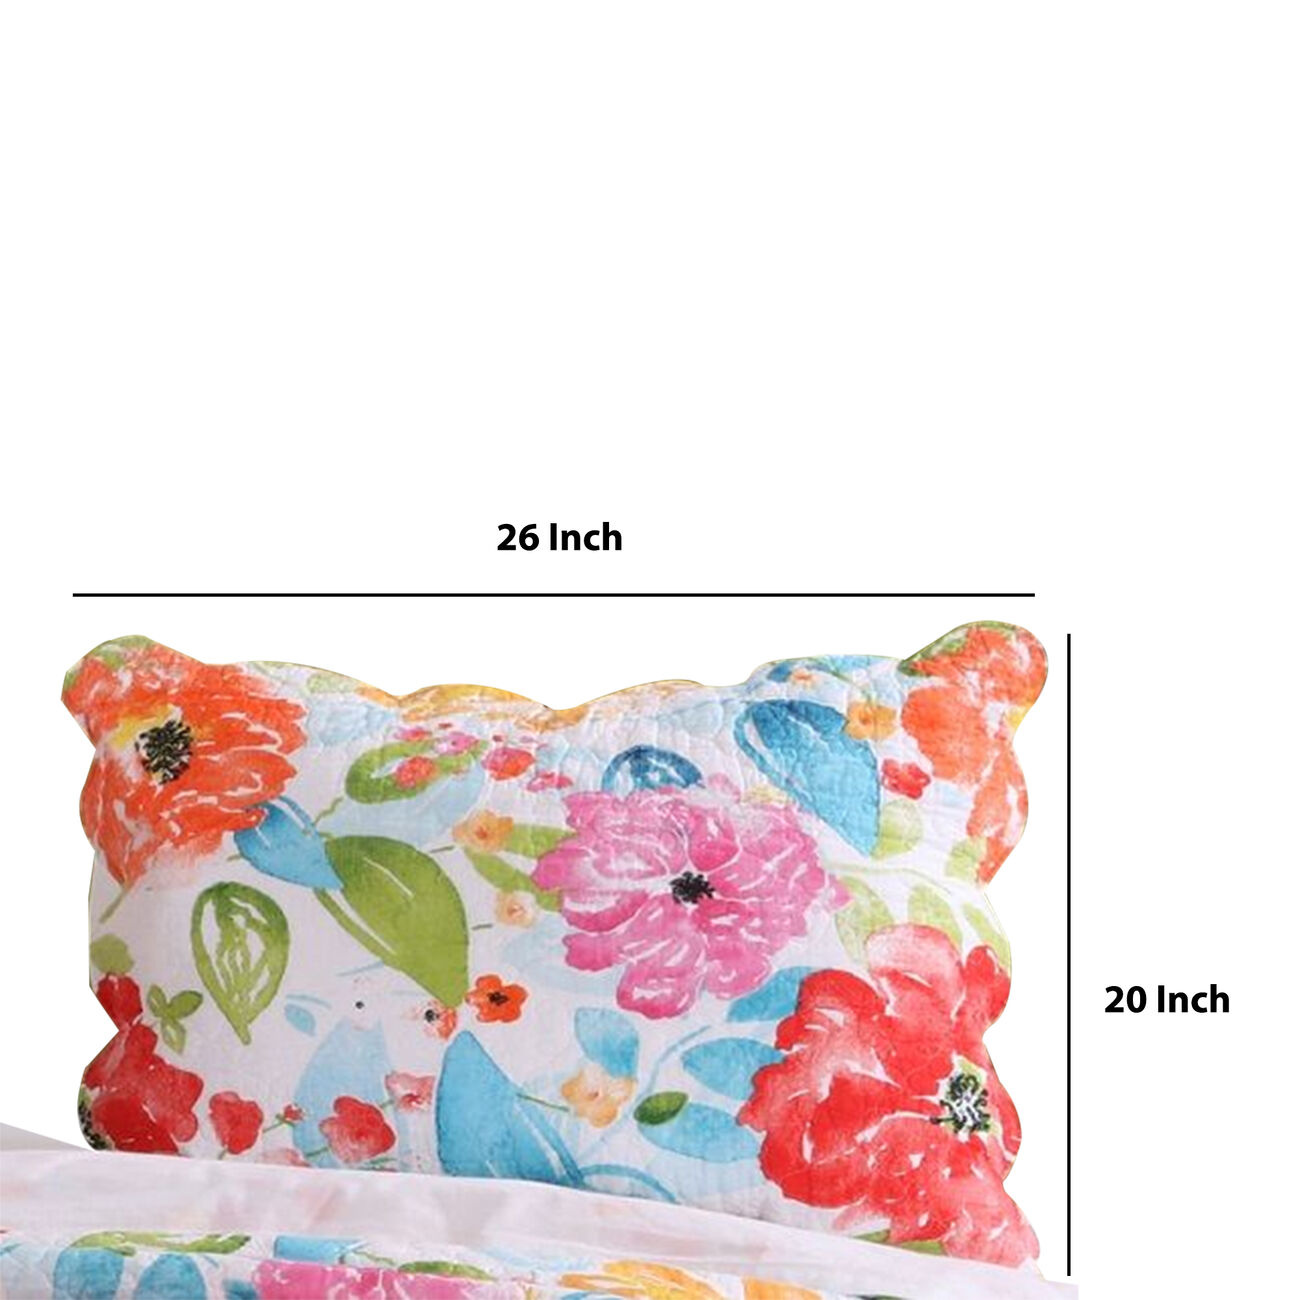 20 X 26 Floral Printed Pillow Sham with Polyester Filling, Multicolor